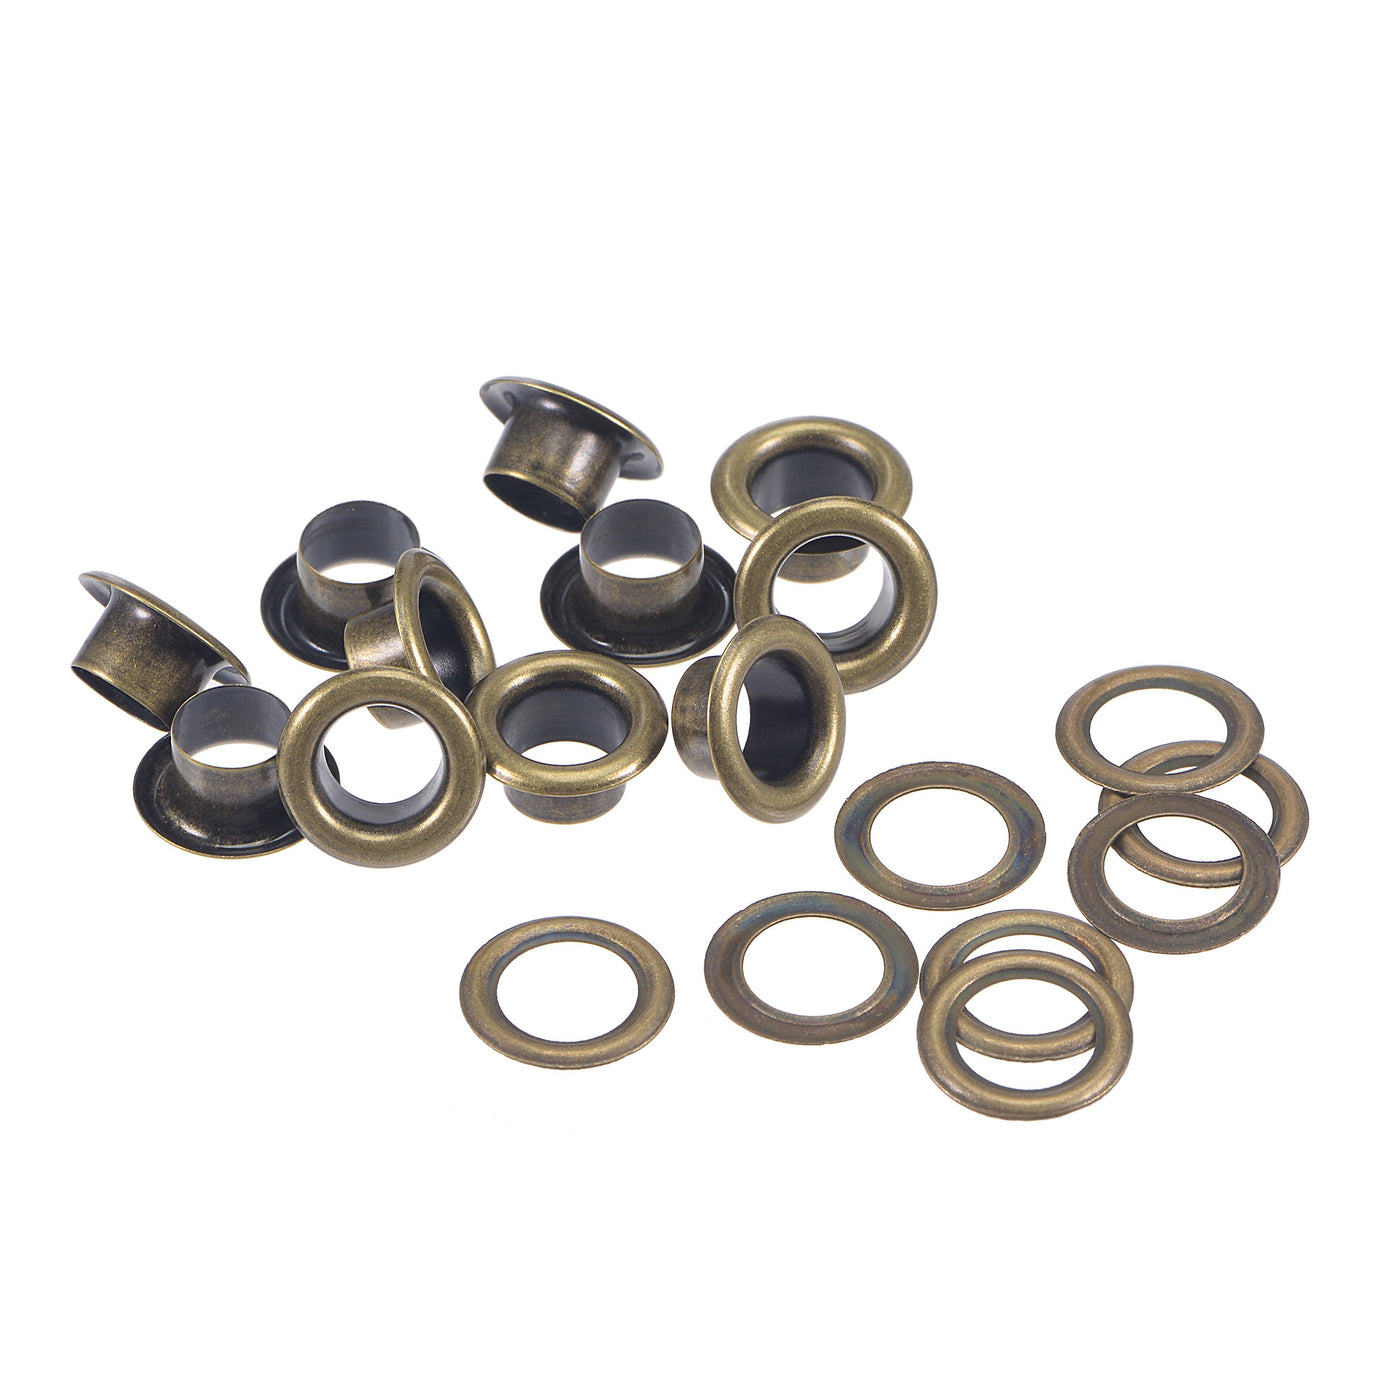 uxcell Uxcell Eyelet with Washer 10.5x6x5mm Copper Grommet Chrome Plated Bronze Tone 100 Set